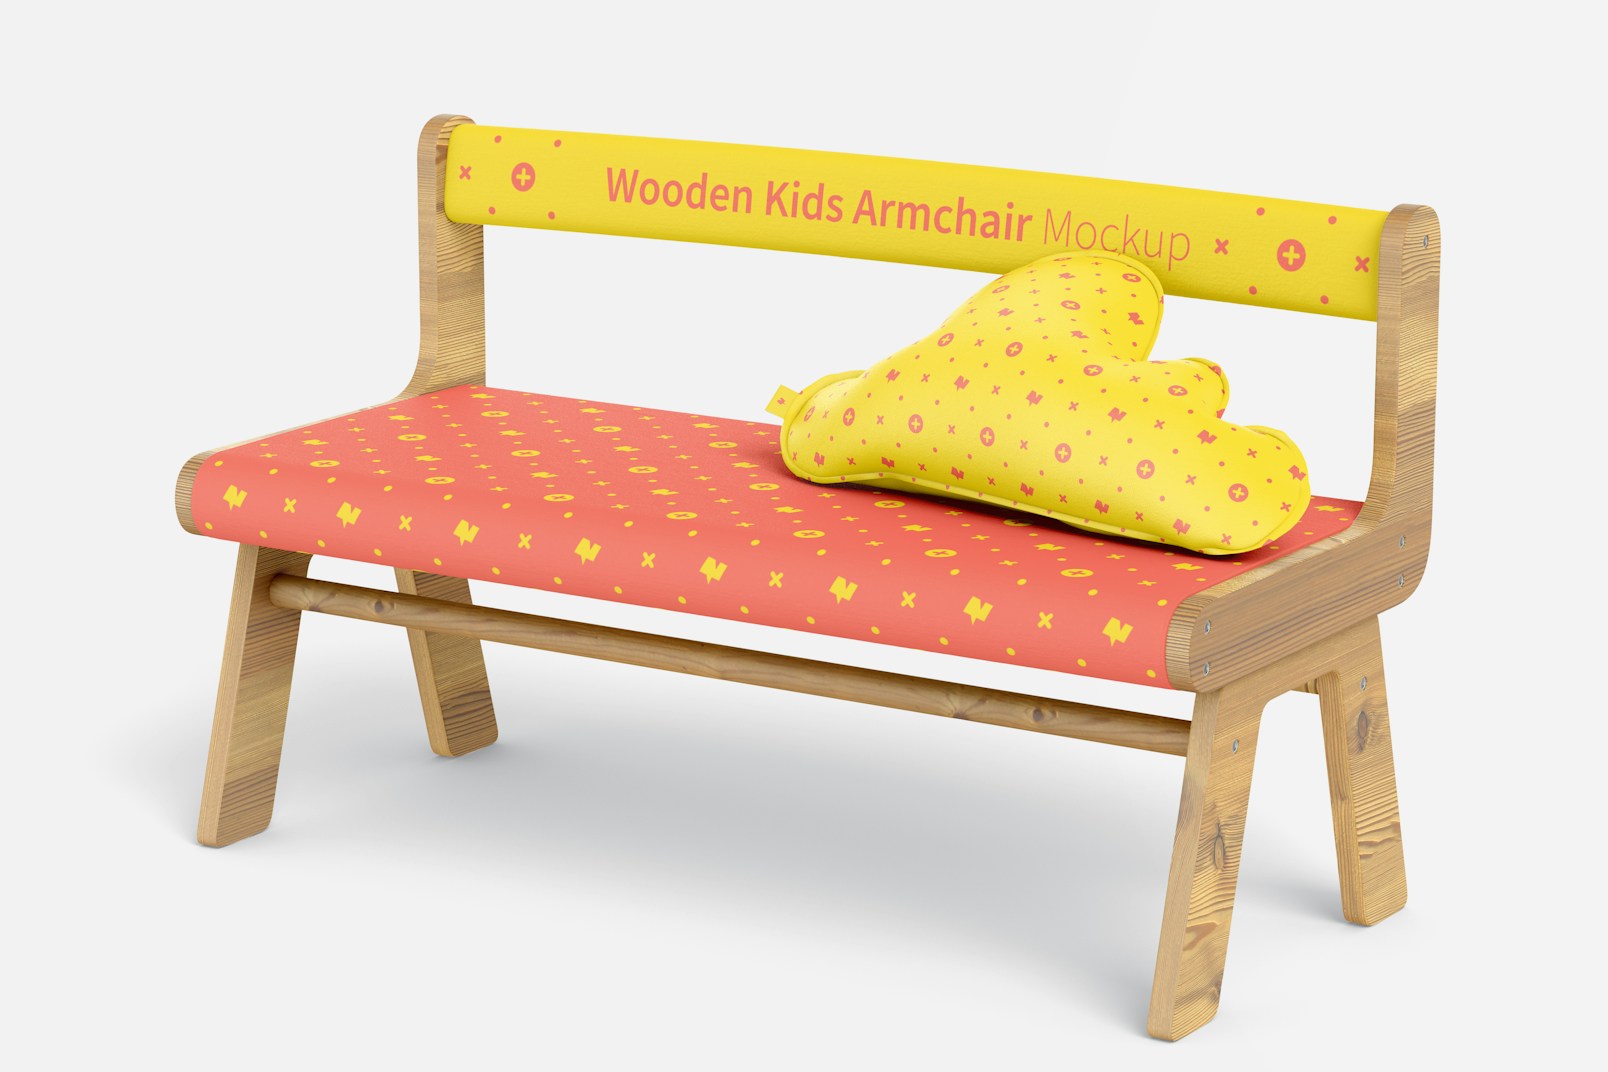 Wooden Kids Armchair Mockup, Right View